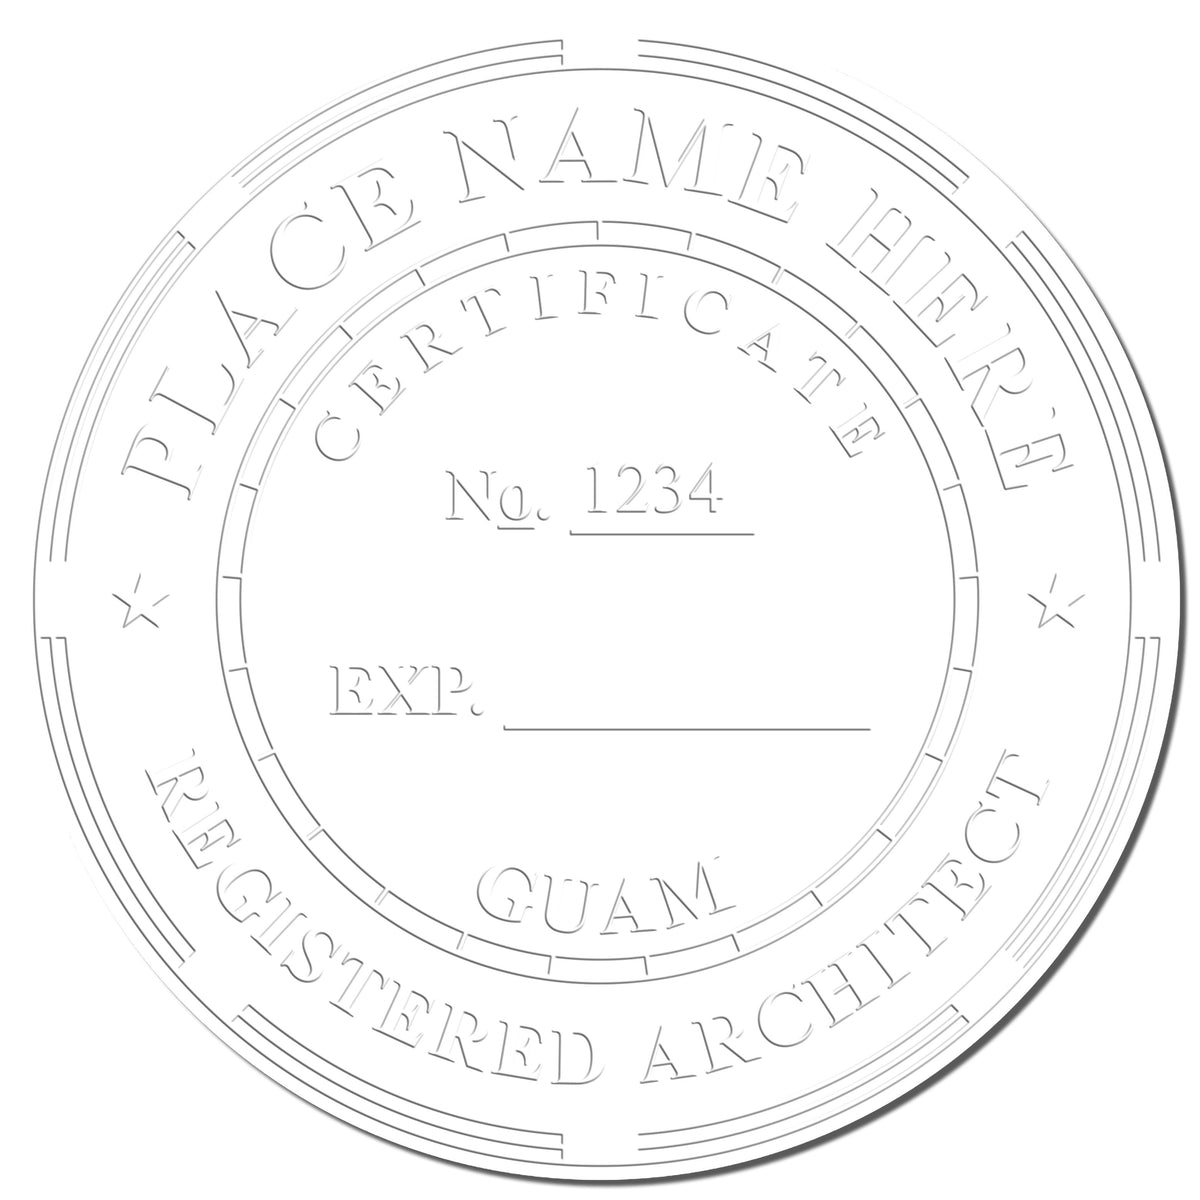 This paper is stamped with a sample imprint of the Gift Guam Architect Seal, signifying its quality and reliability.